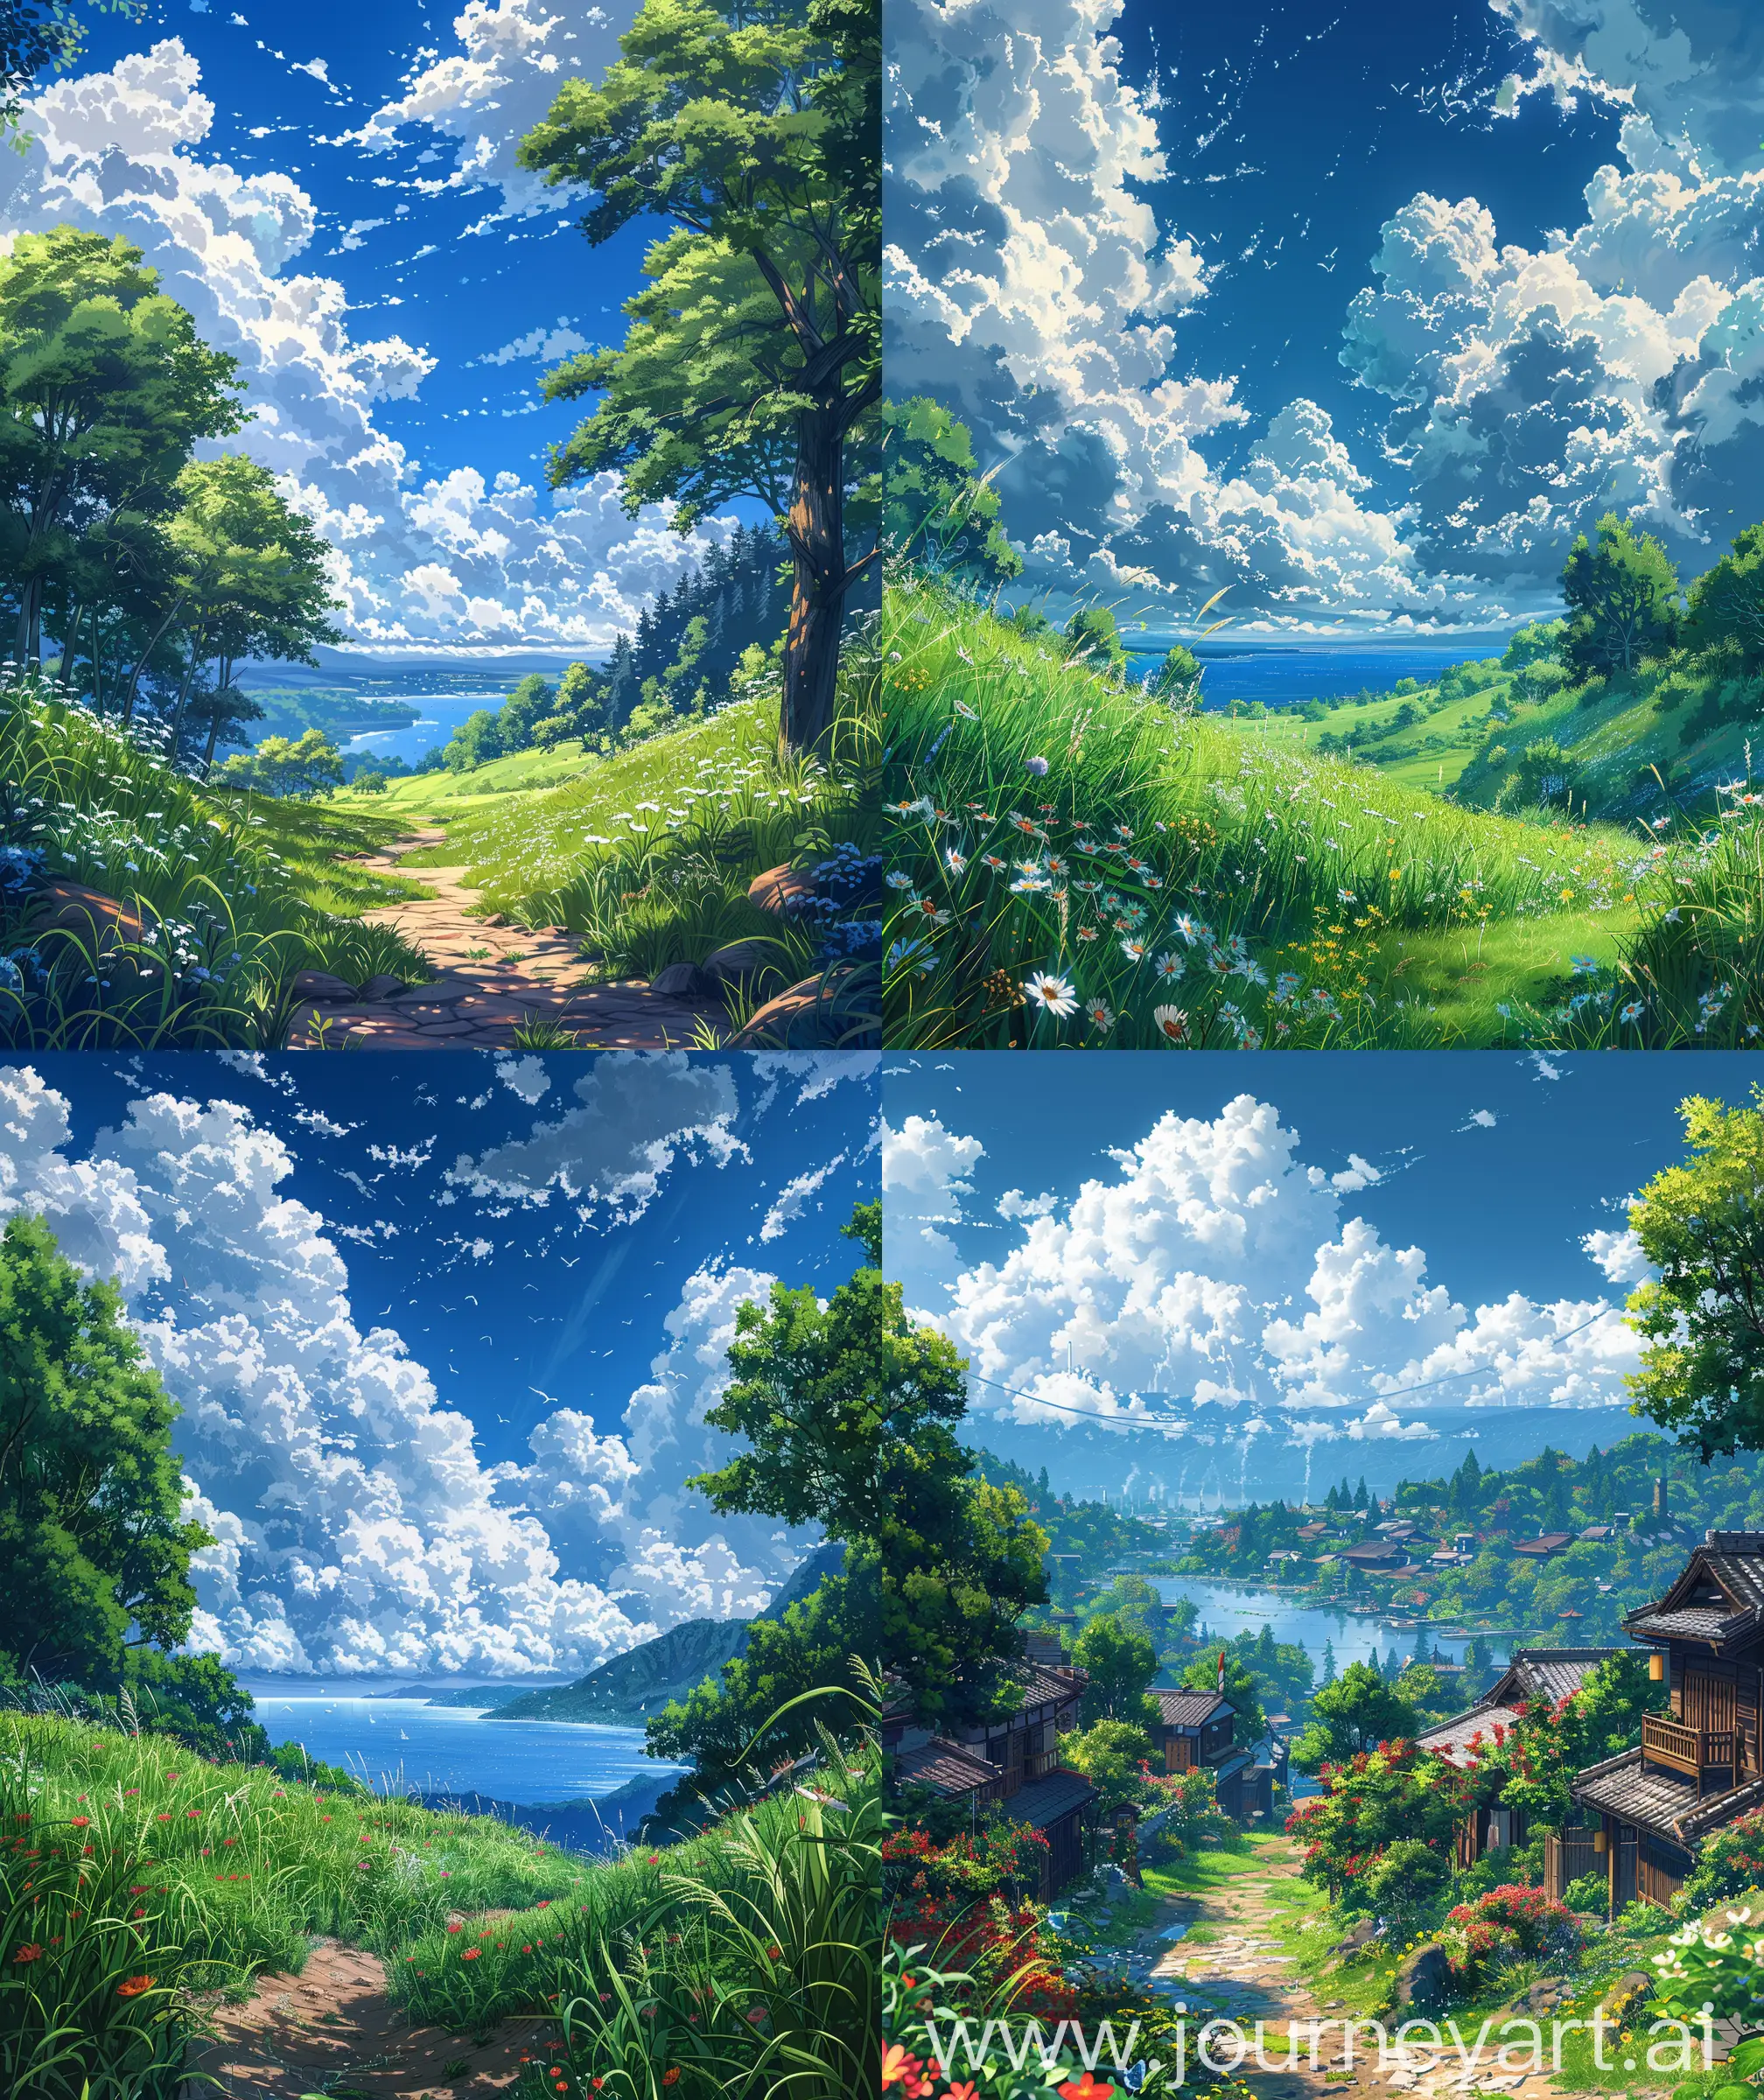 Anime-Style-Summer-Nature-Scenery-Various-Tranquil-Landscapes-in-Makoto-Shinkai-Style